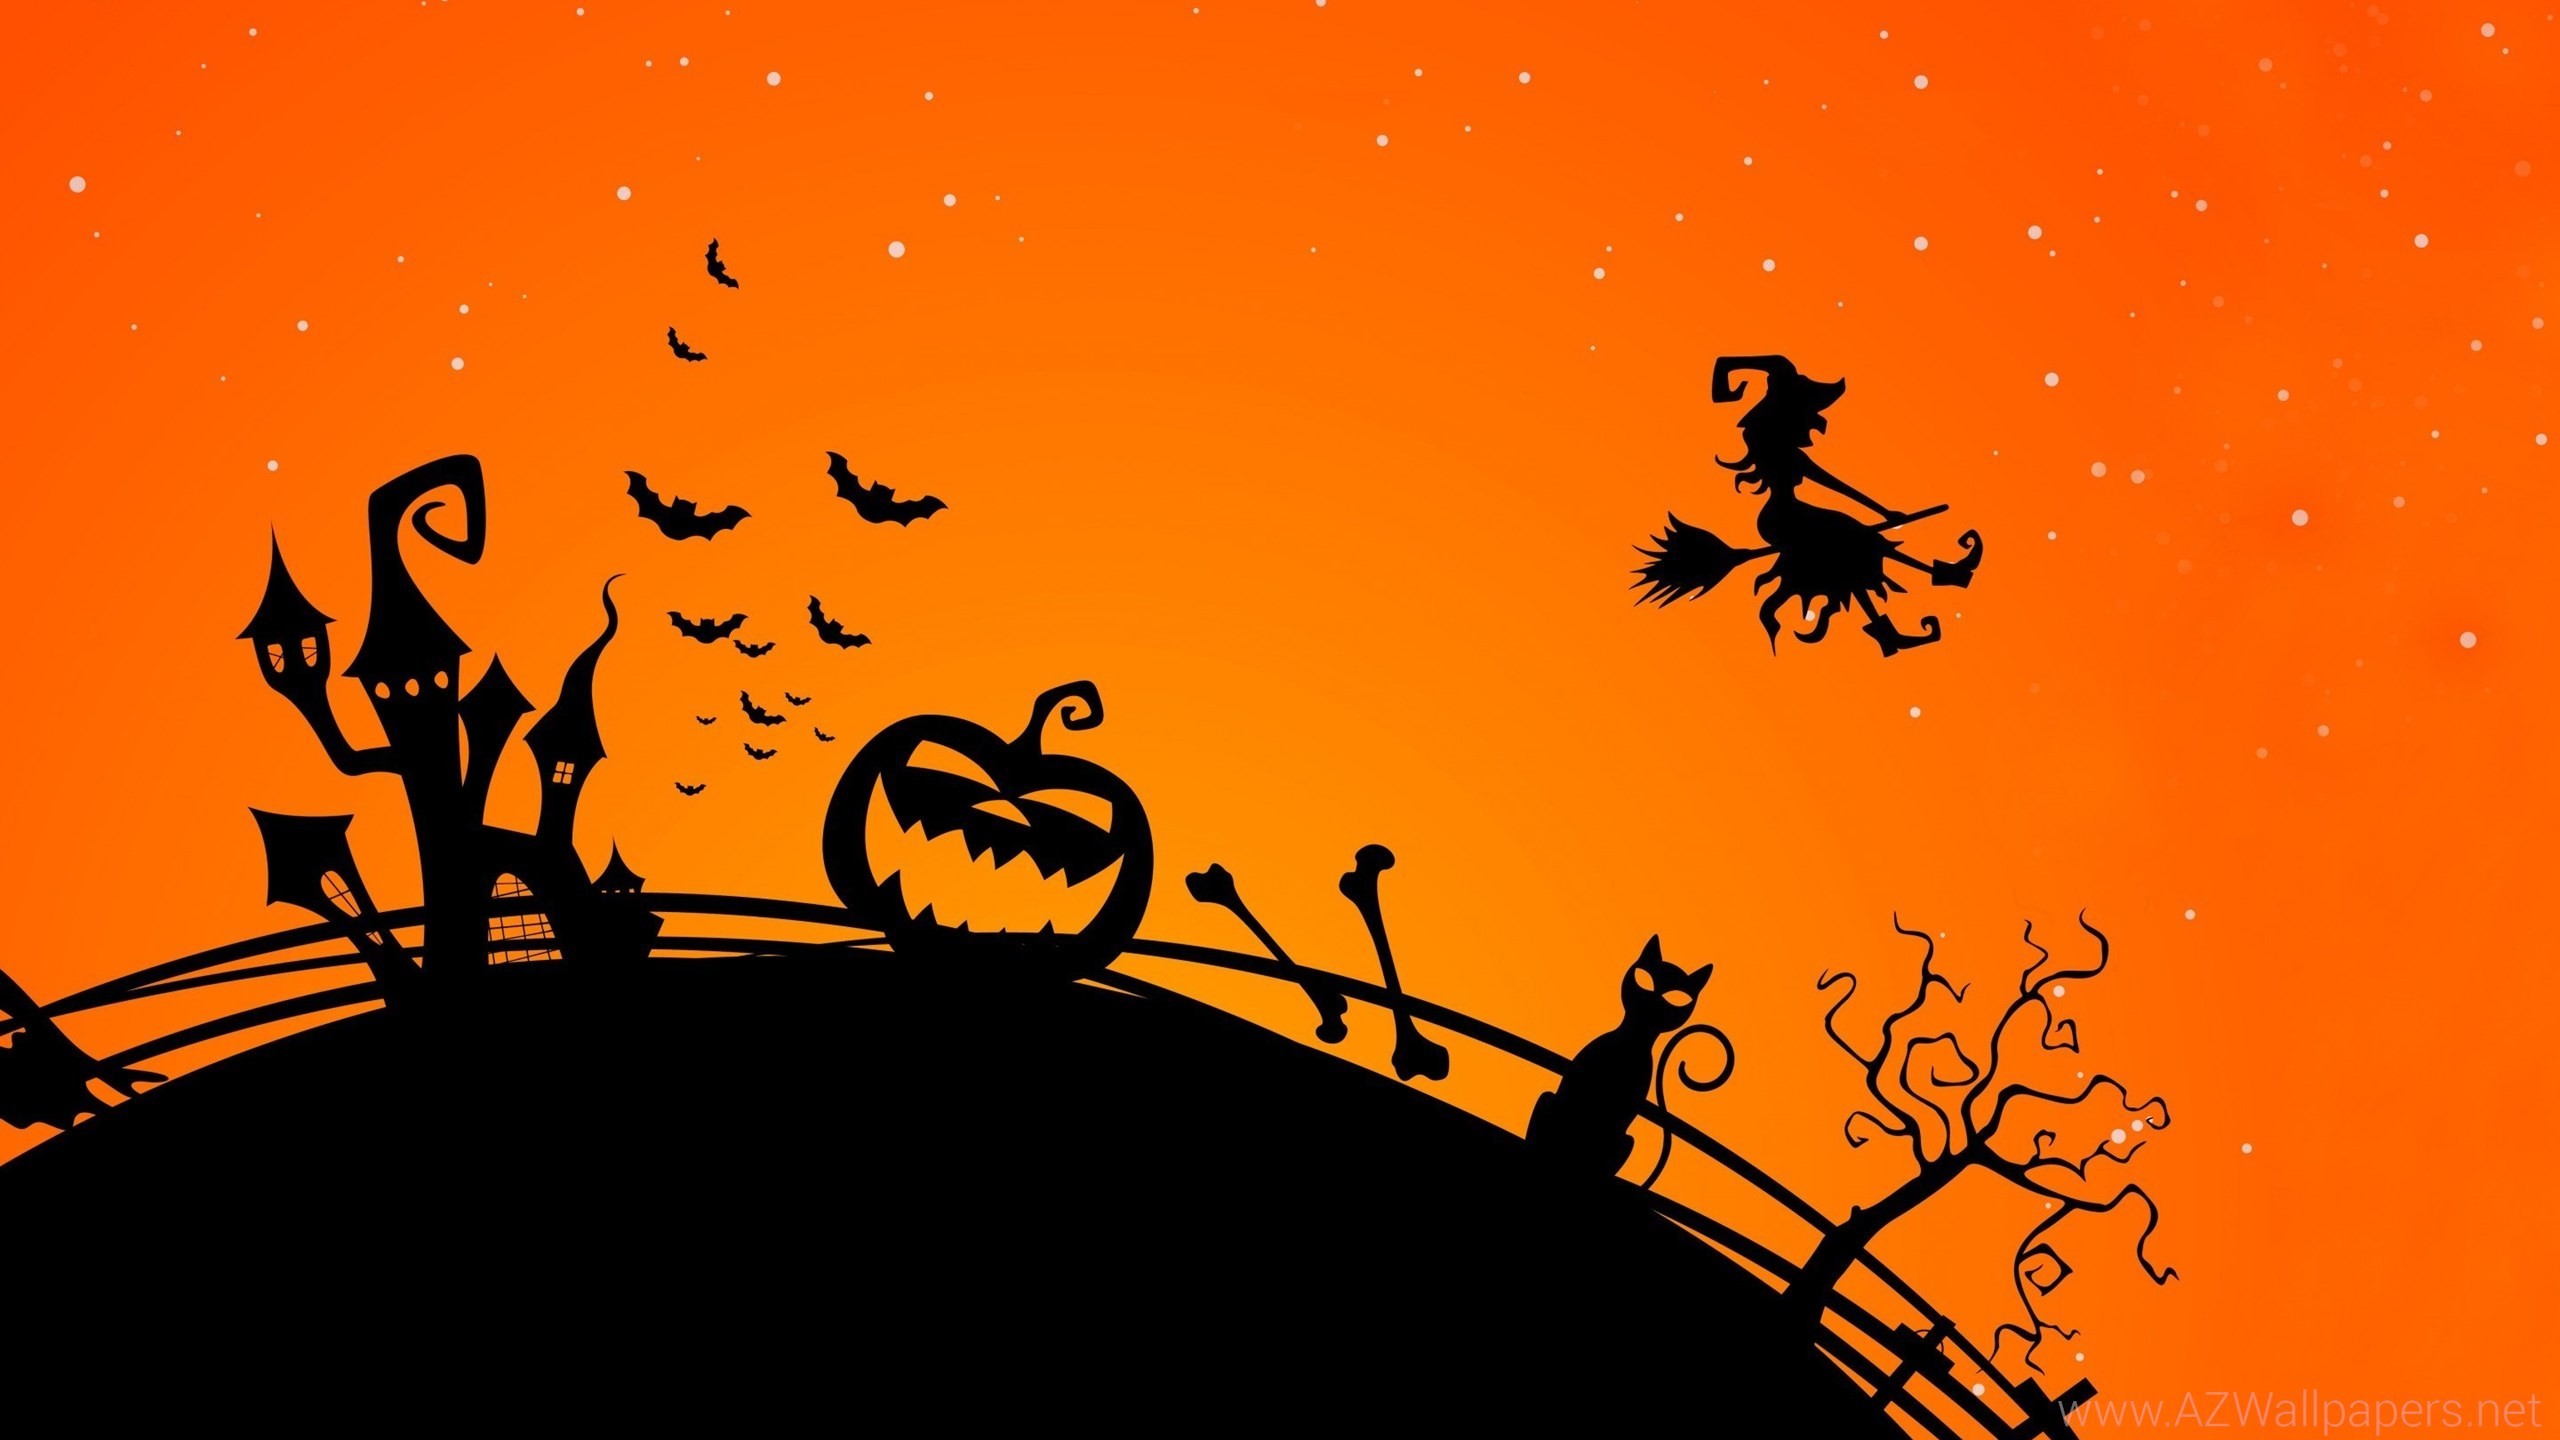 2560x1440  Halloween Tumblr Wallpapers Cute And Funny Halloween Tumblr ...  Halloween Tumblr Wallpapers Cute And Funny Halloween Tumblr